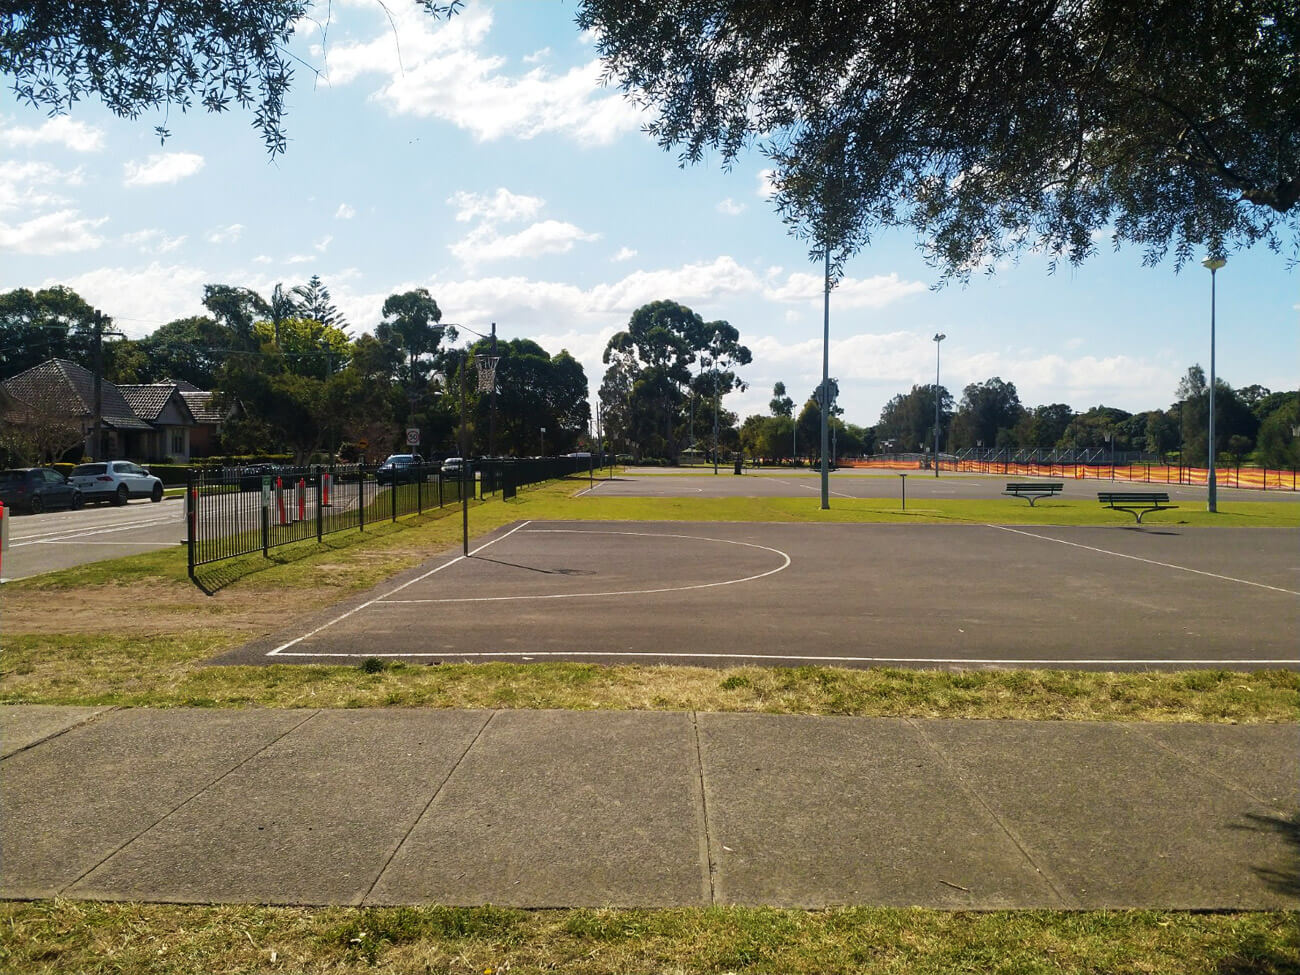 Haberfield basketball courts